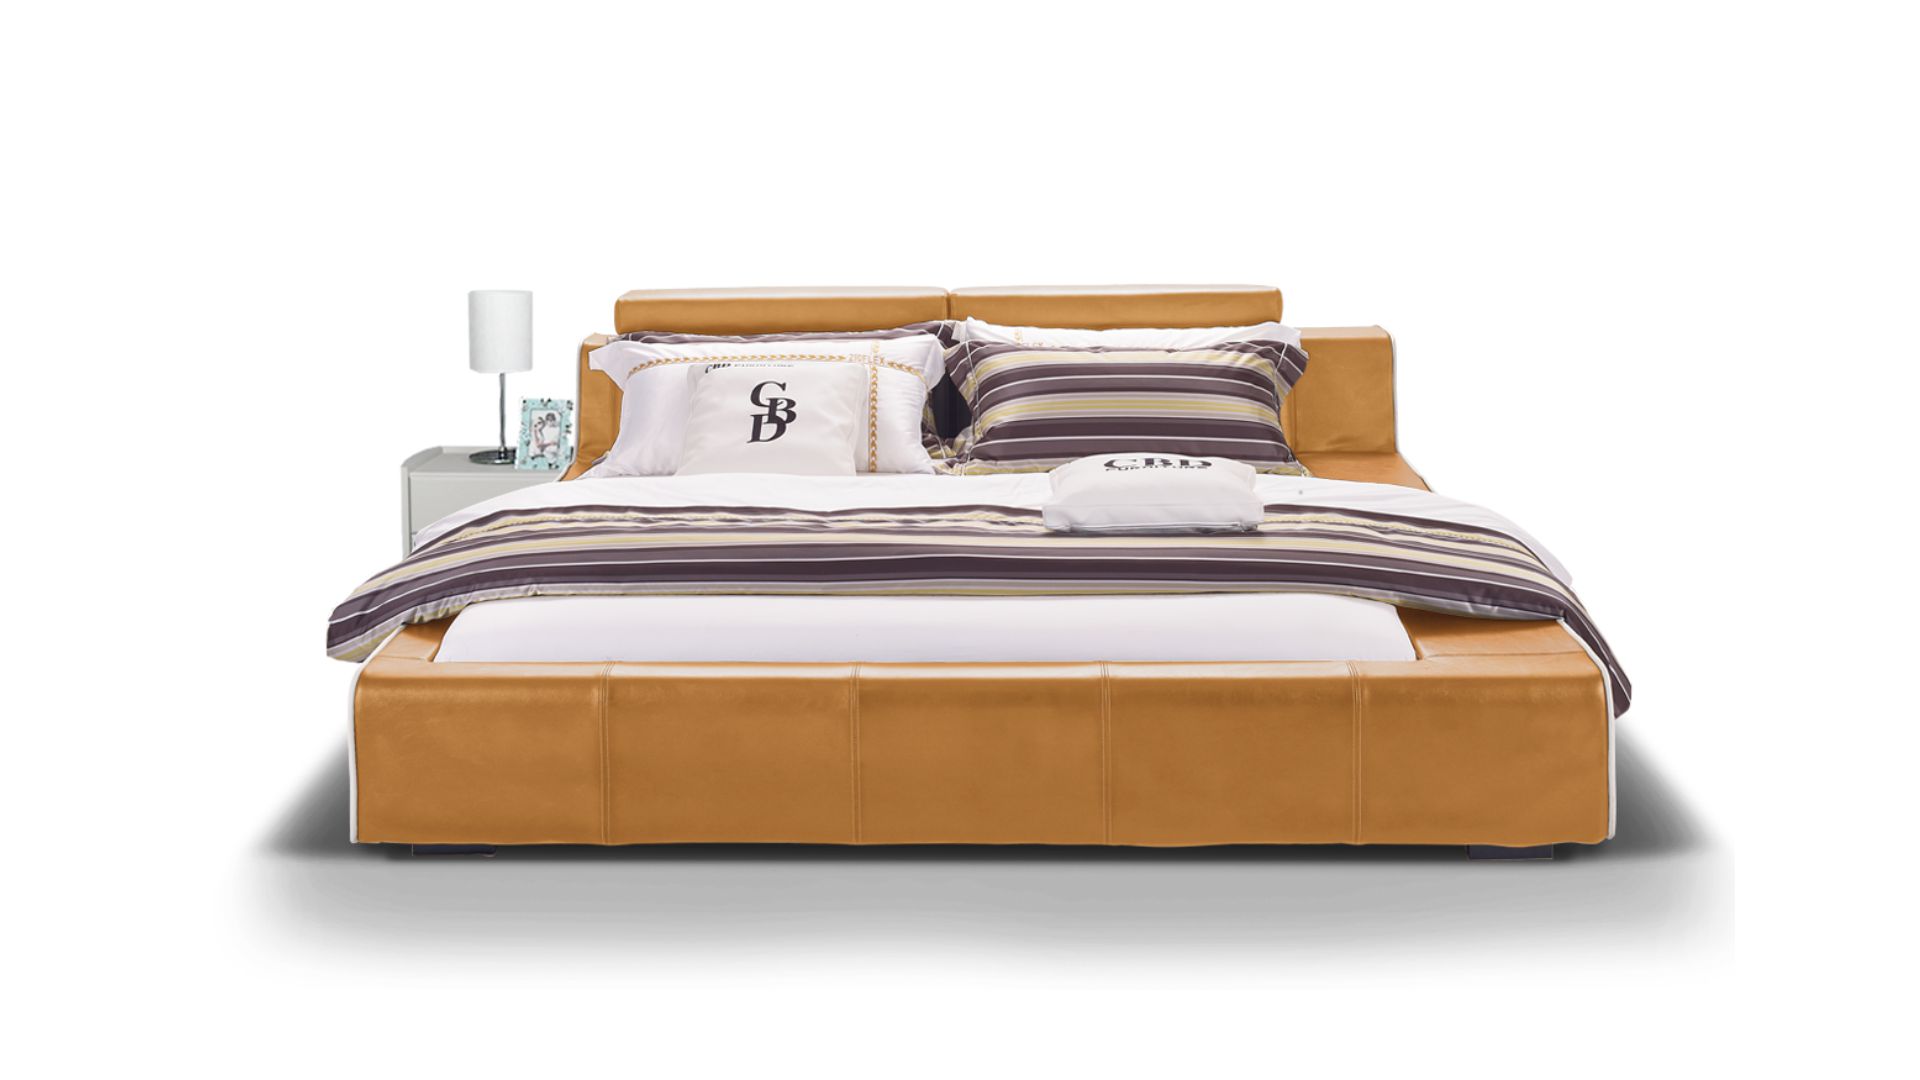 <p><strong>description：</strong></p><p>*bedframe with the 3D slats or motion</p><p>*the design of widen bedside makes the bed look different.</p><p>*Well matched the mattress and bedding.</p><p><br/></p>